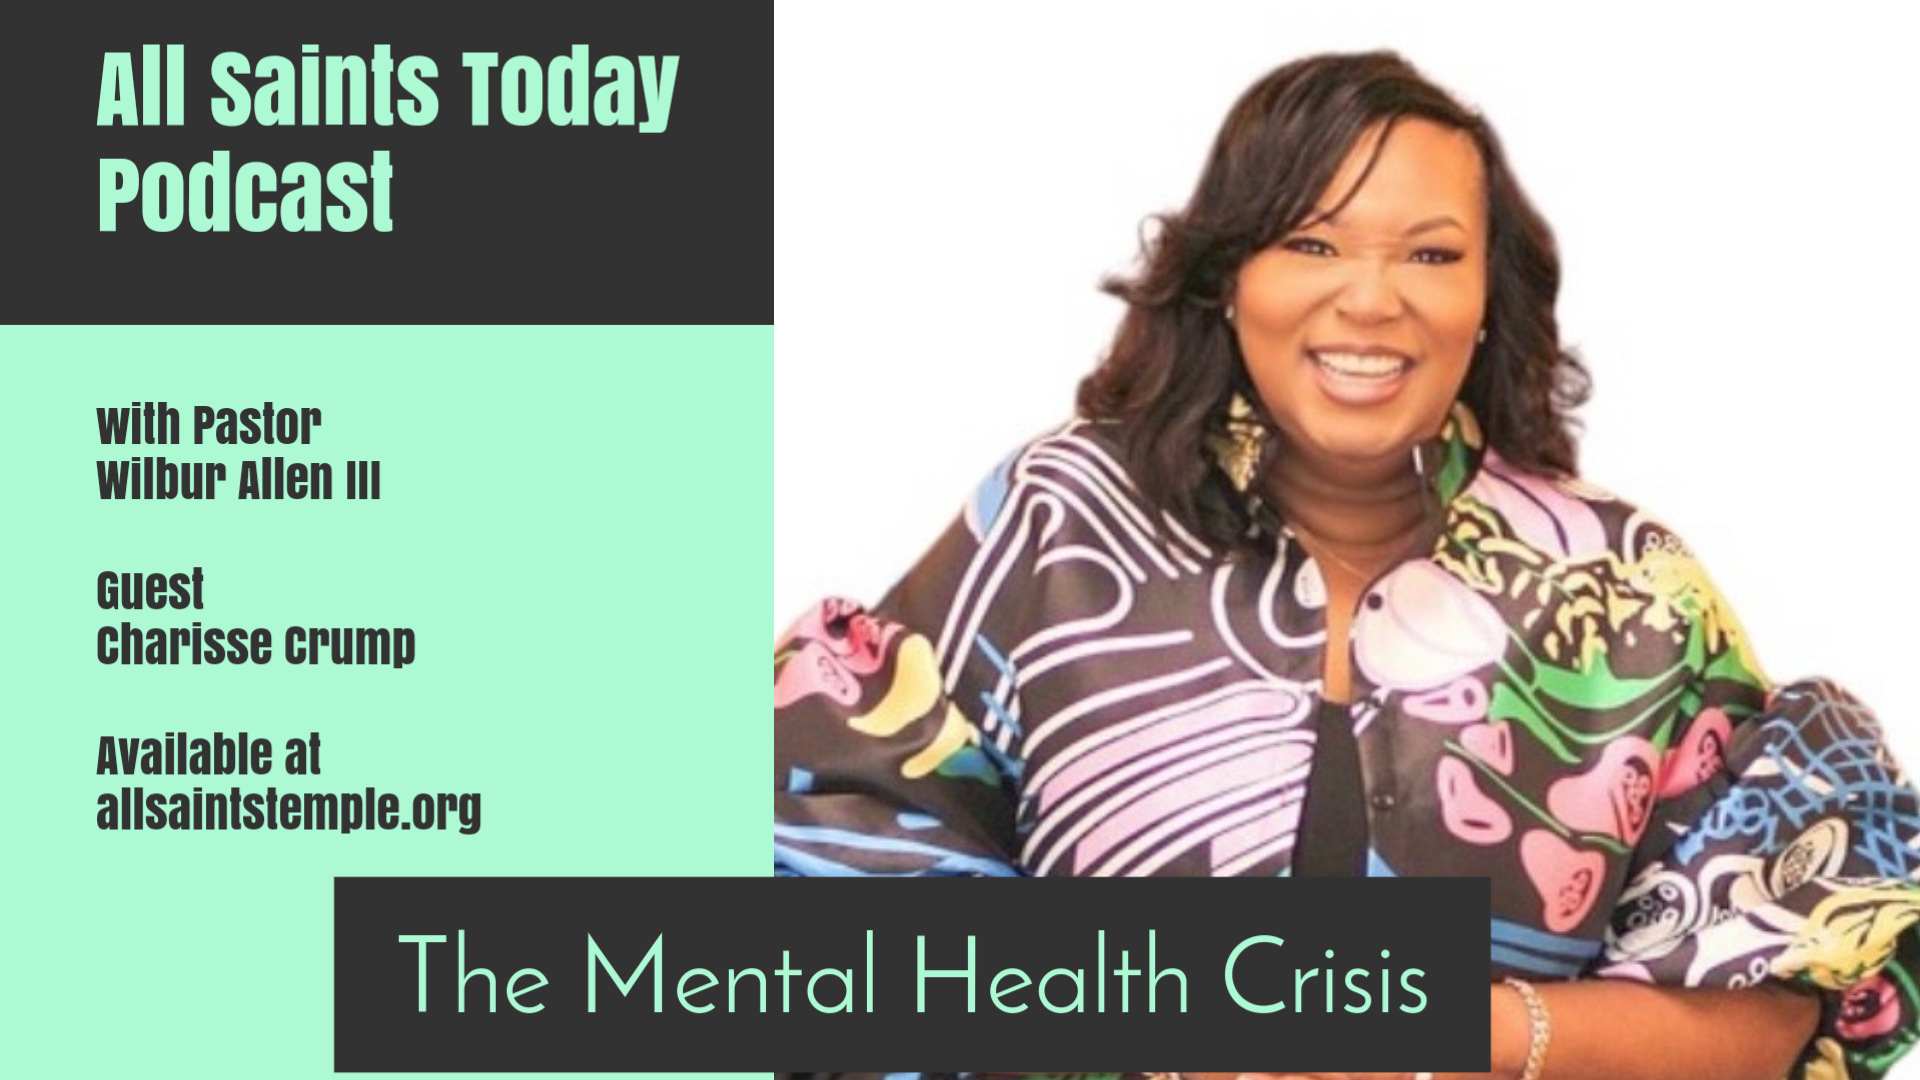 All Saints Today Podcast - The Mental Health Crisis